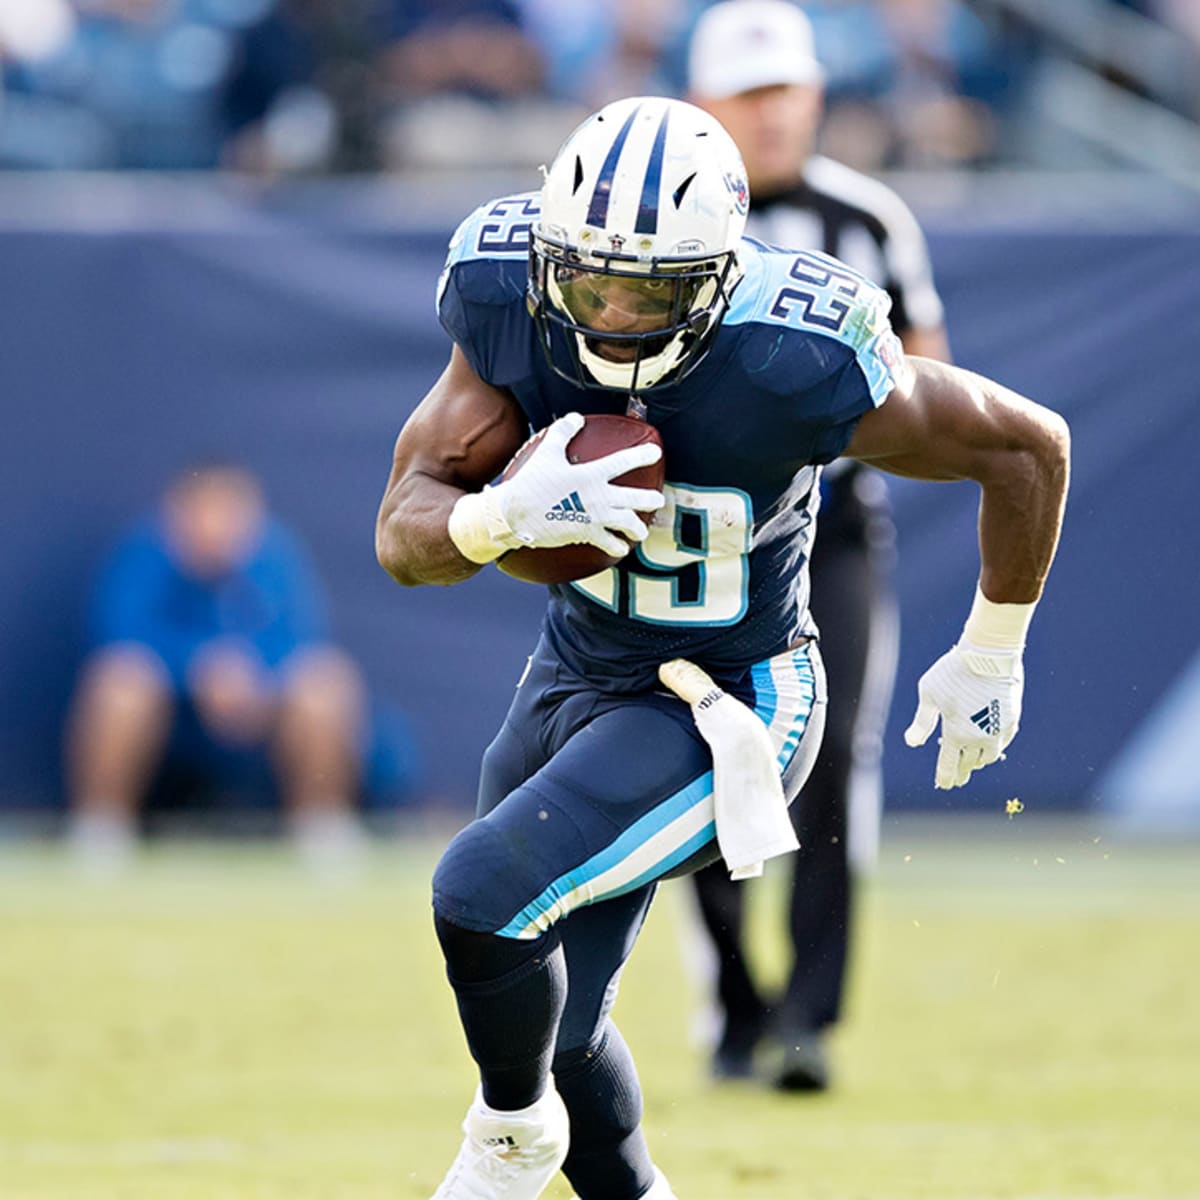 2014 top offensive player RB DeMarco Murray retires